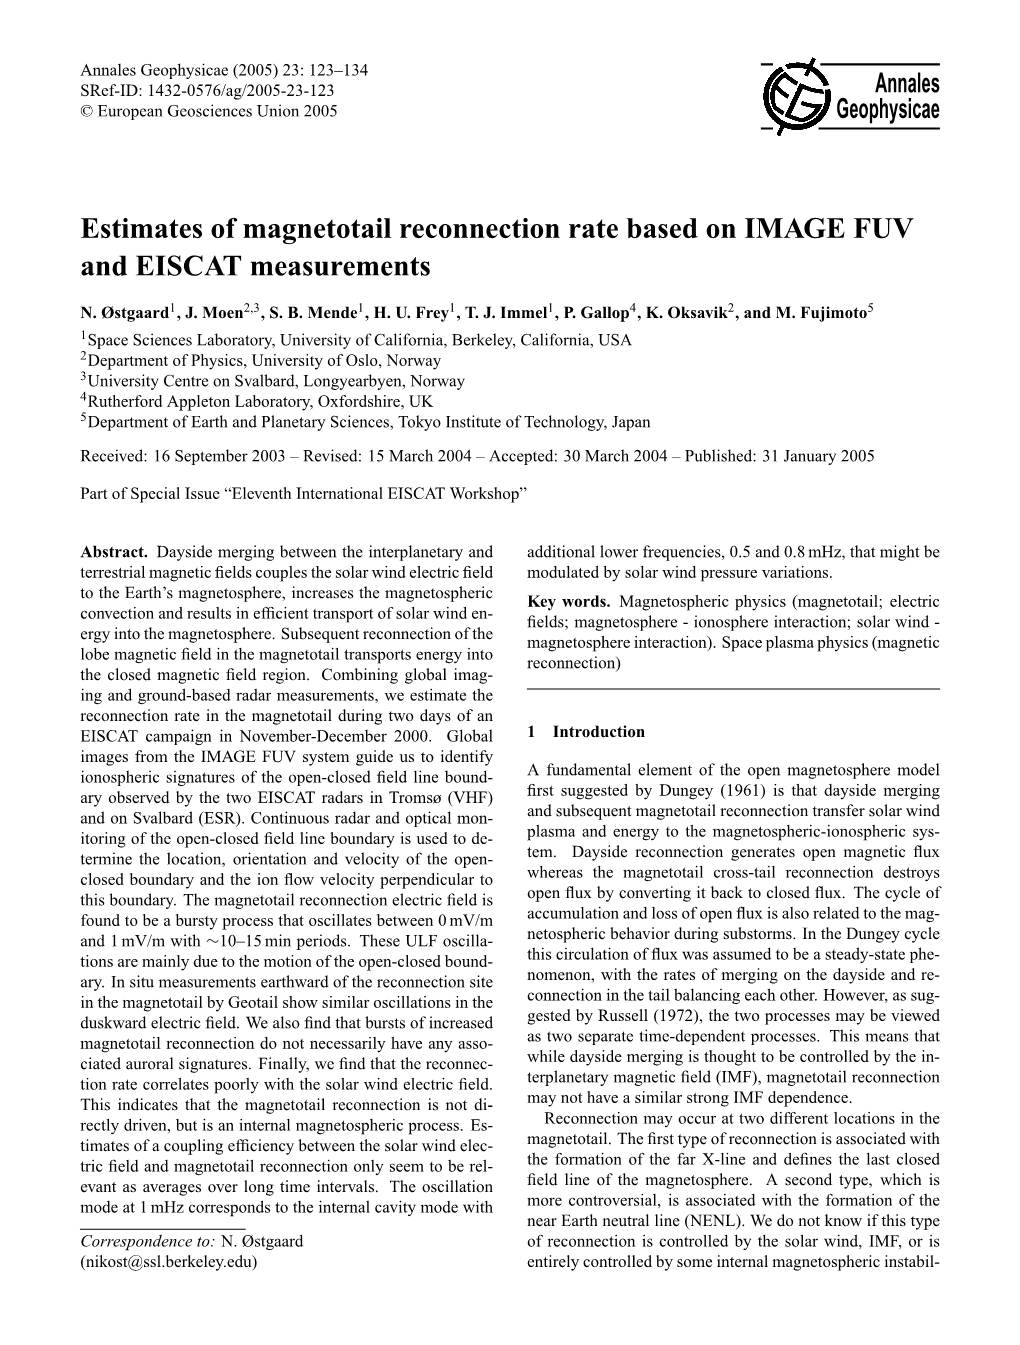 Estimates of Magnetotail Reconnection Rate Based on IMAGE FUV and EISCAT Measurements